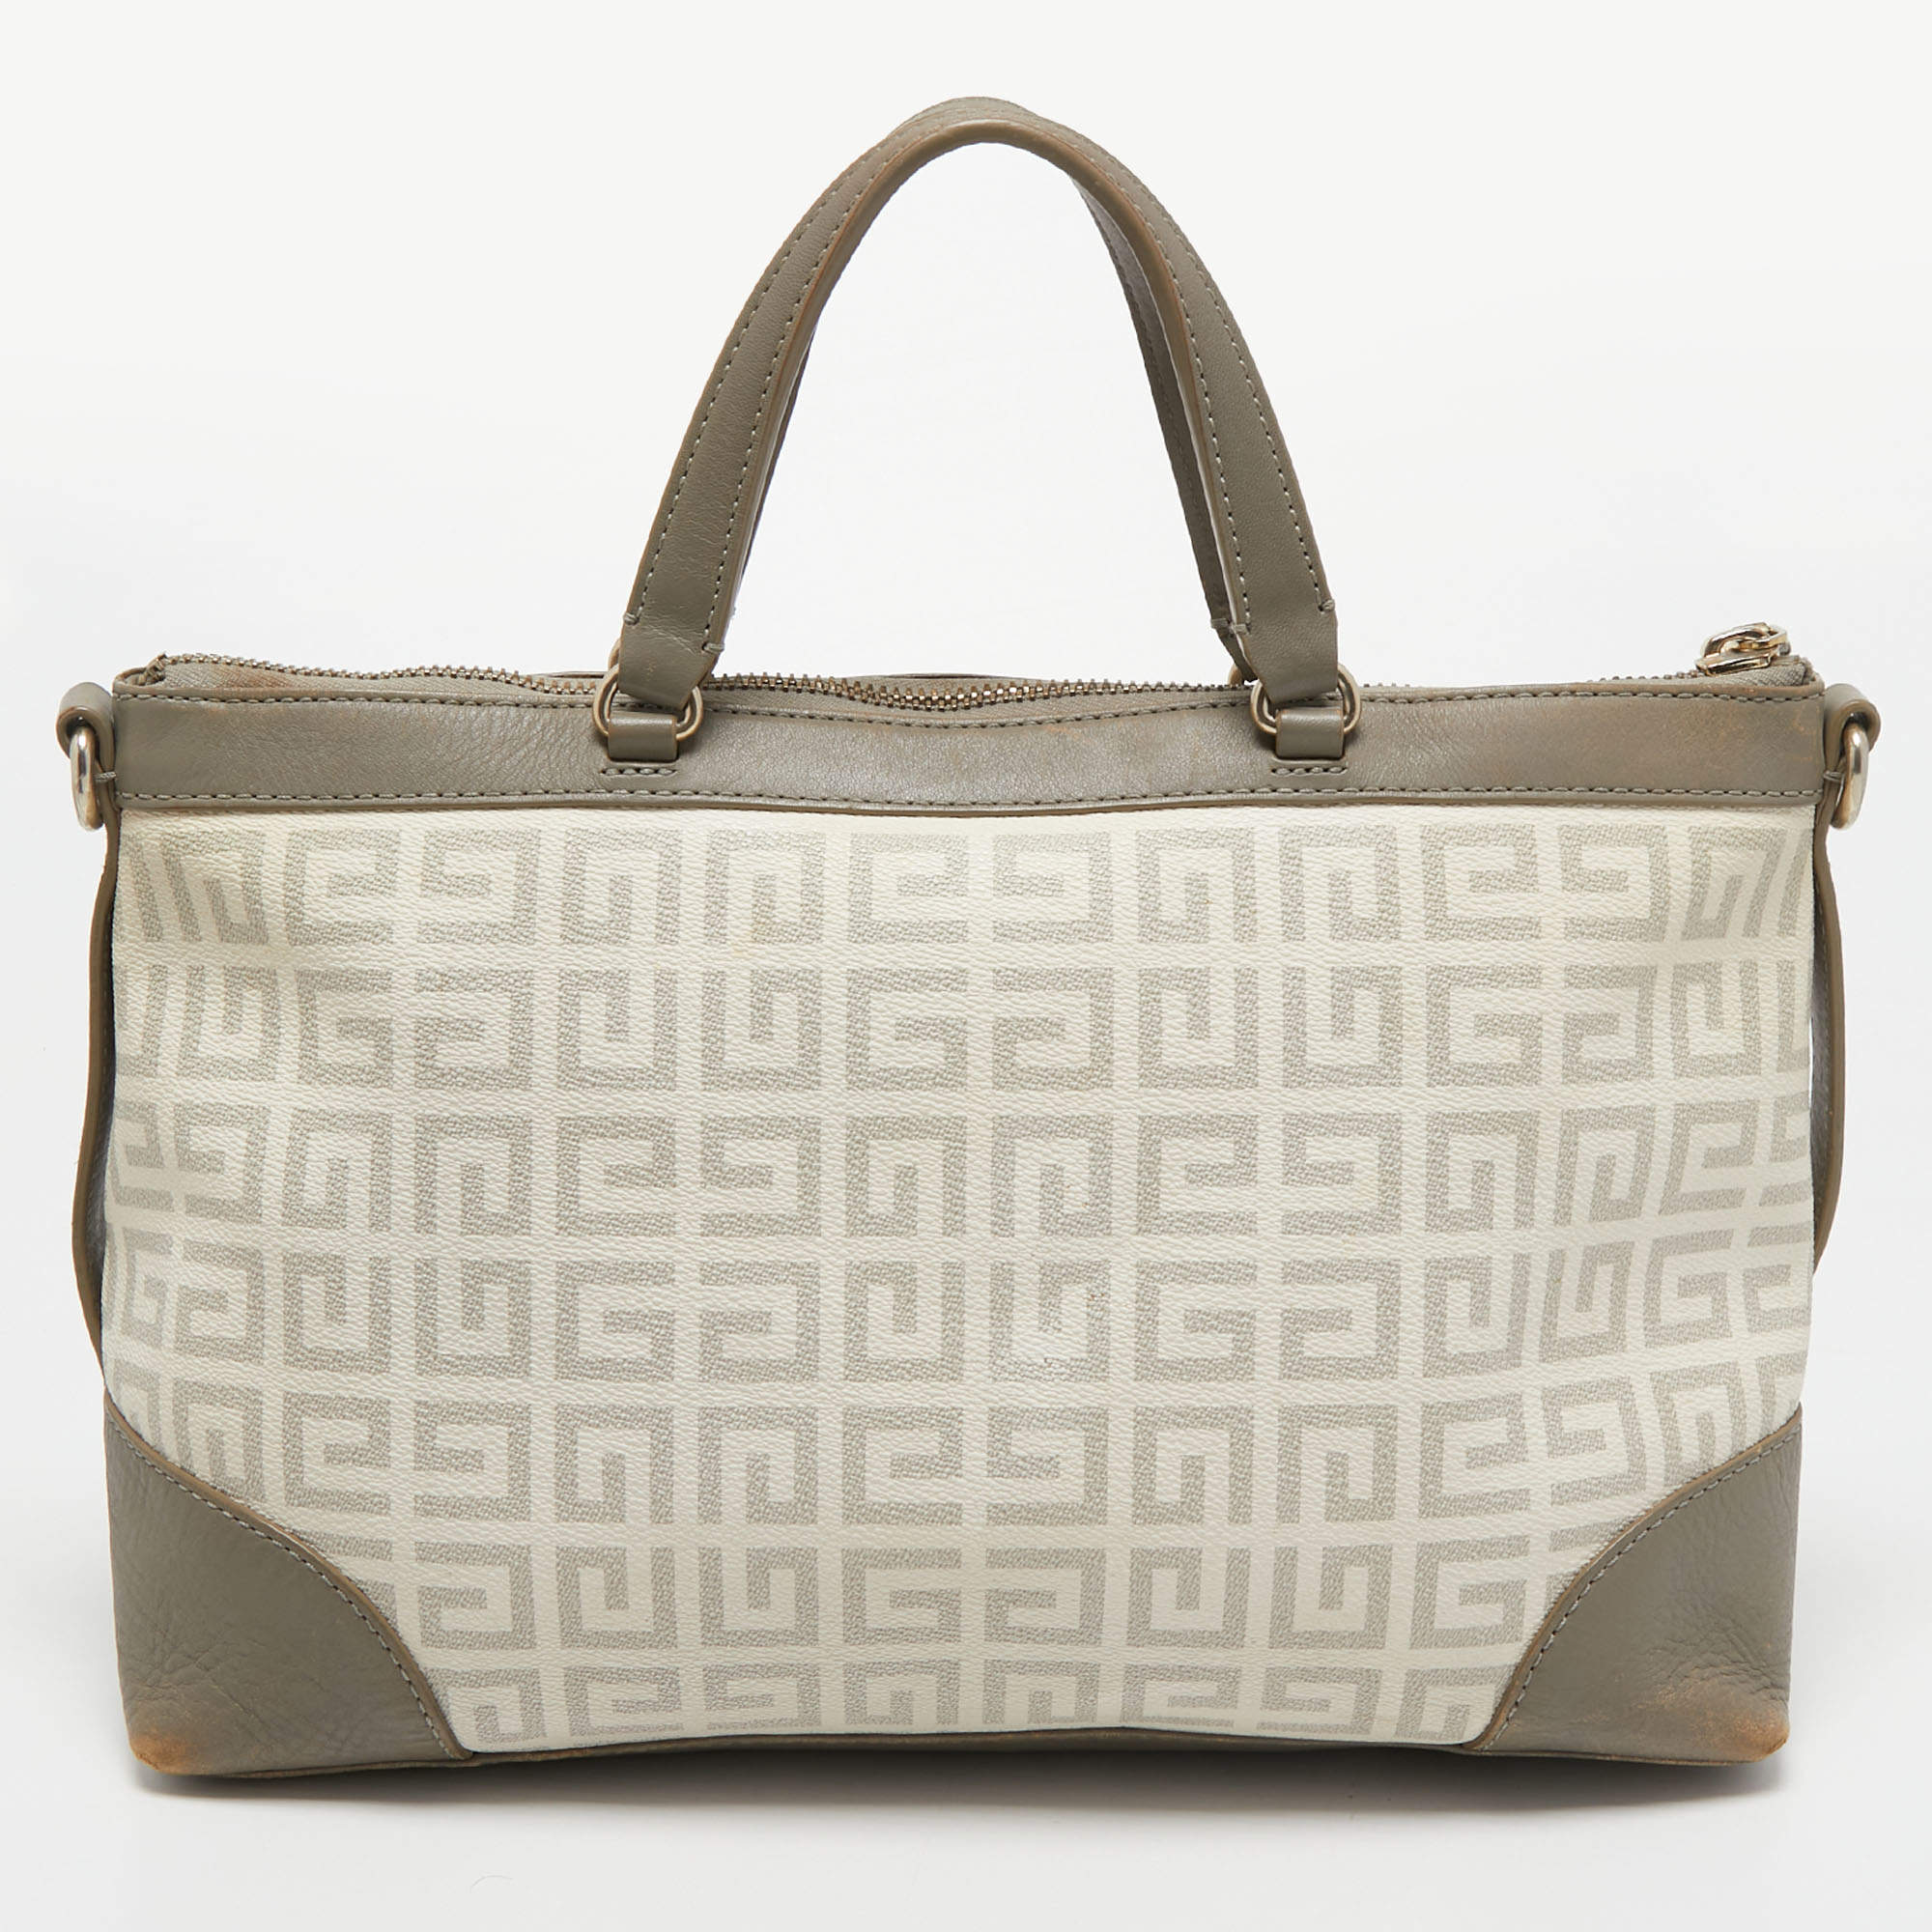 G medium leather-trimmed embossed coated-canvas tote